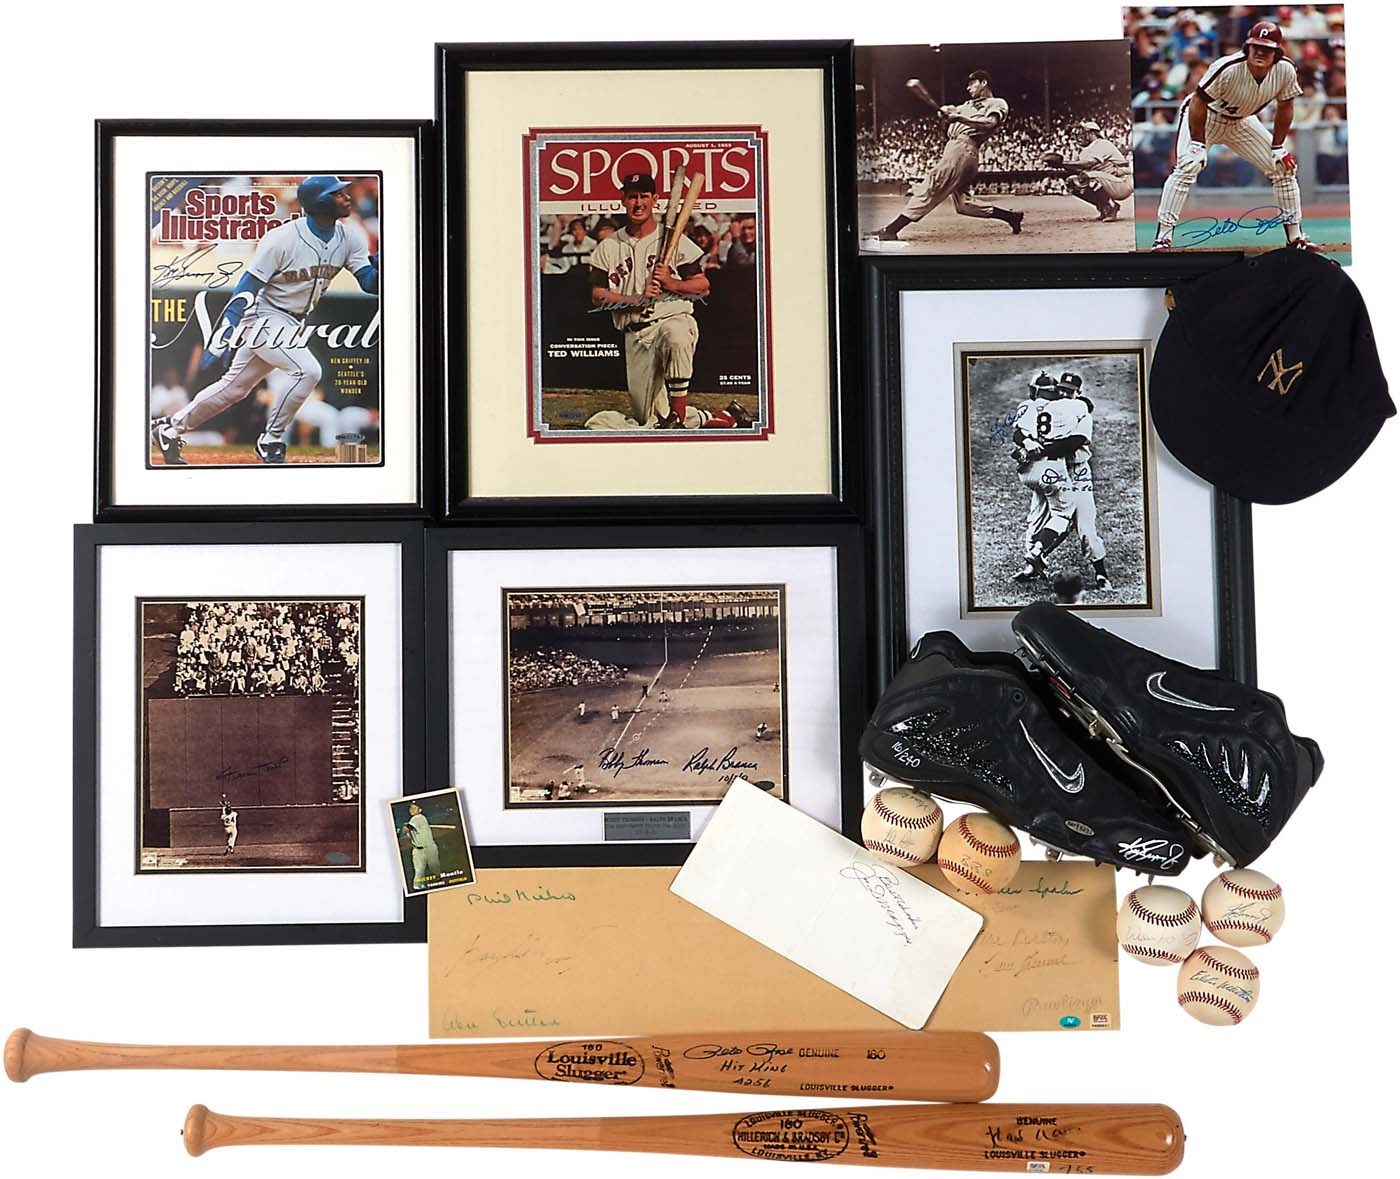 Baseball Autographs - Baseball Autograph Collection with DiMaggio, Williams & Much More (17 items)